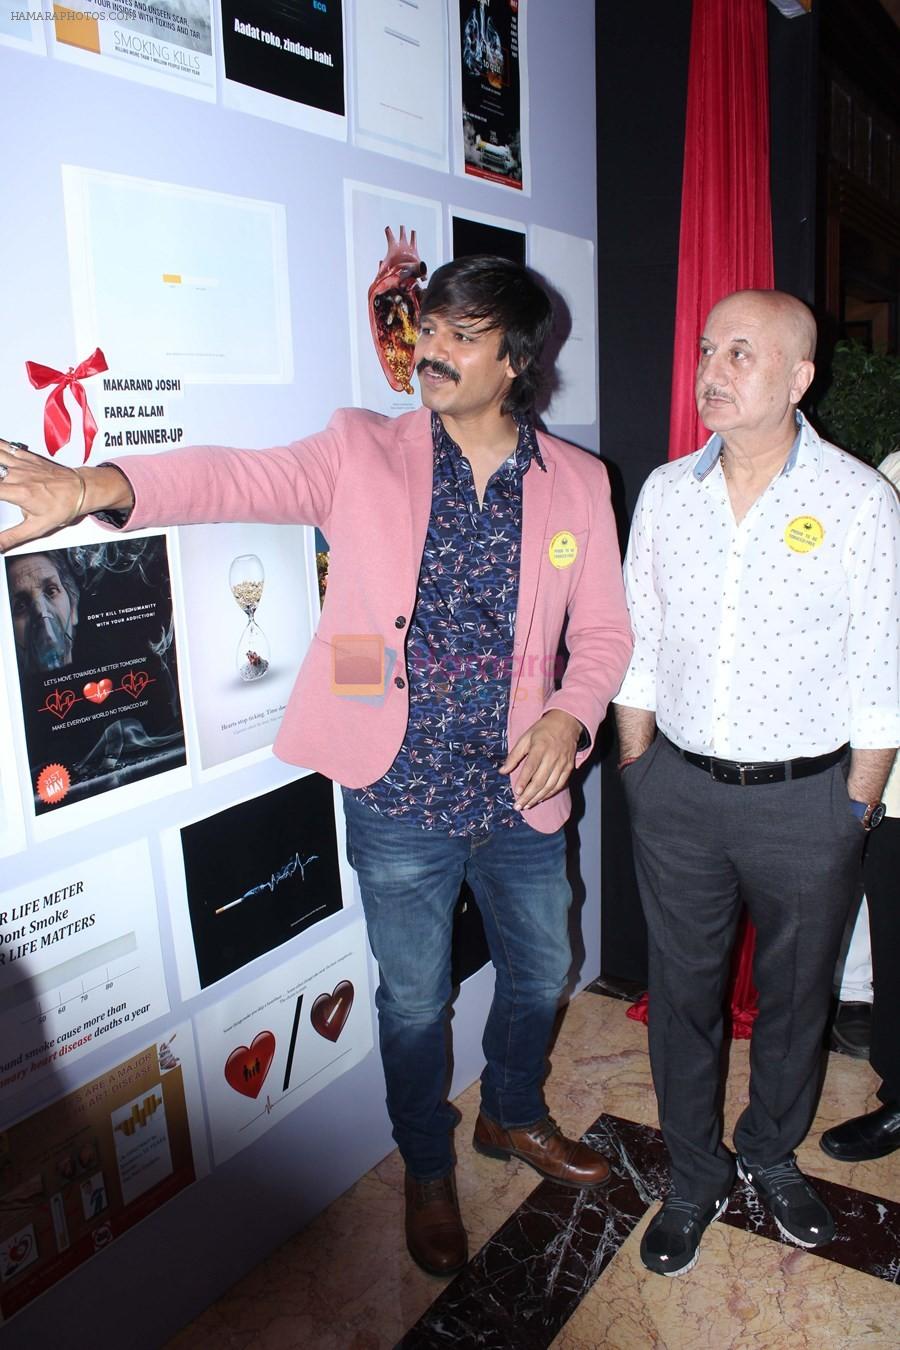 Vivek Oberoi, Anupam Kher at World No Tobacco Day 2018 event in Taj Lands end on 30th May 2018